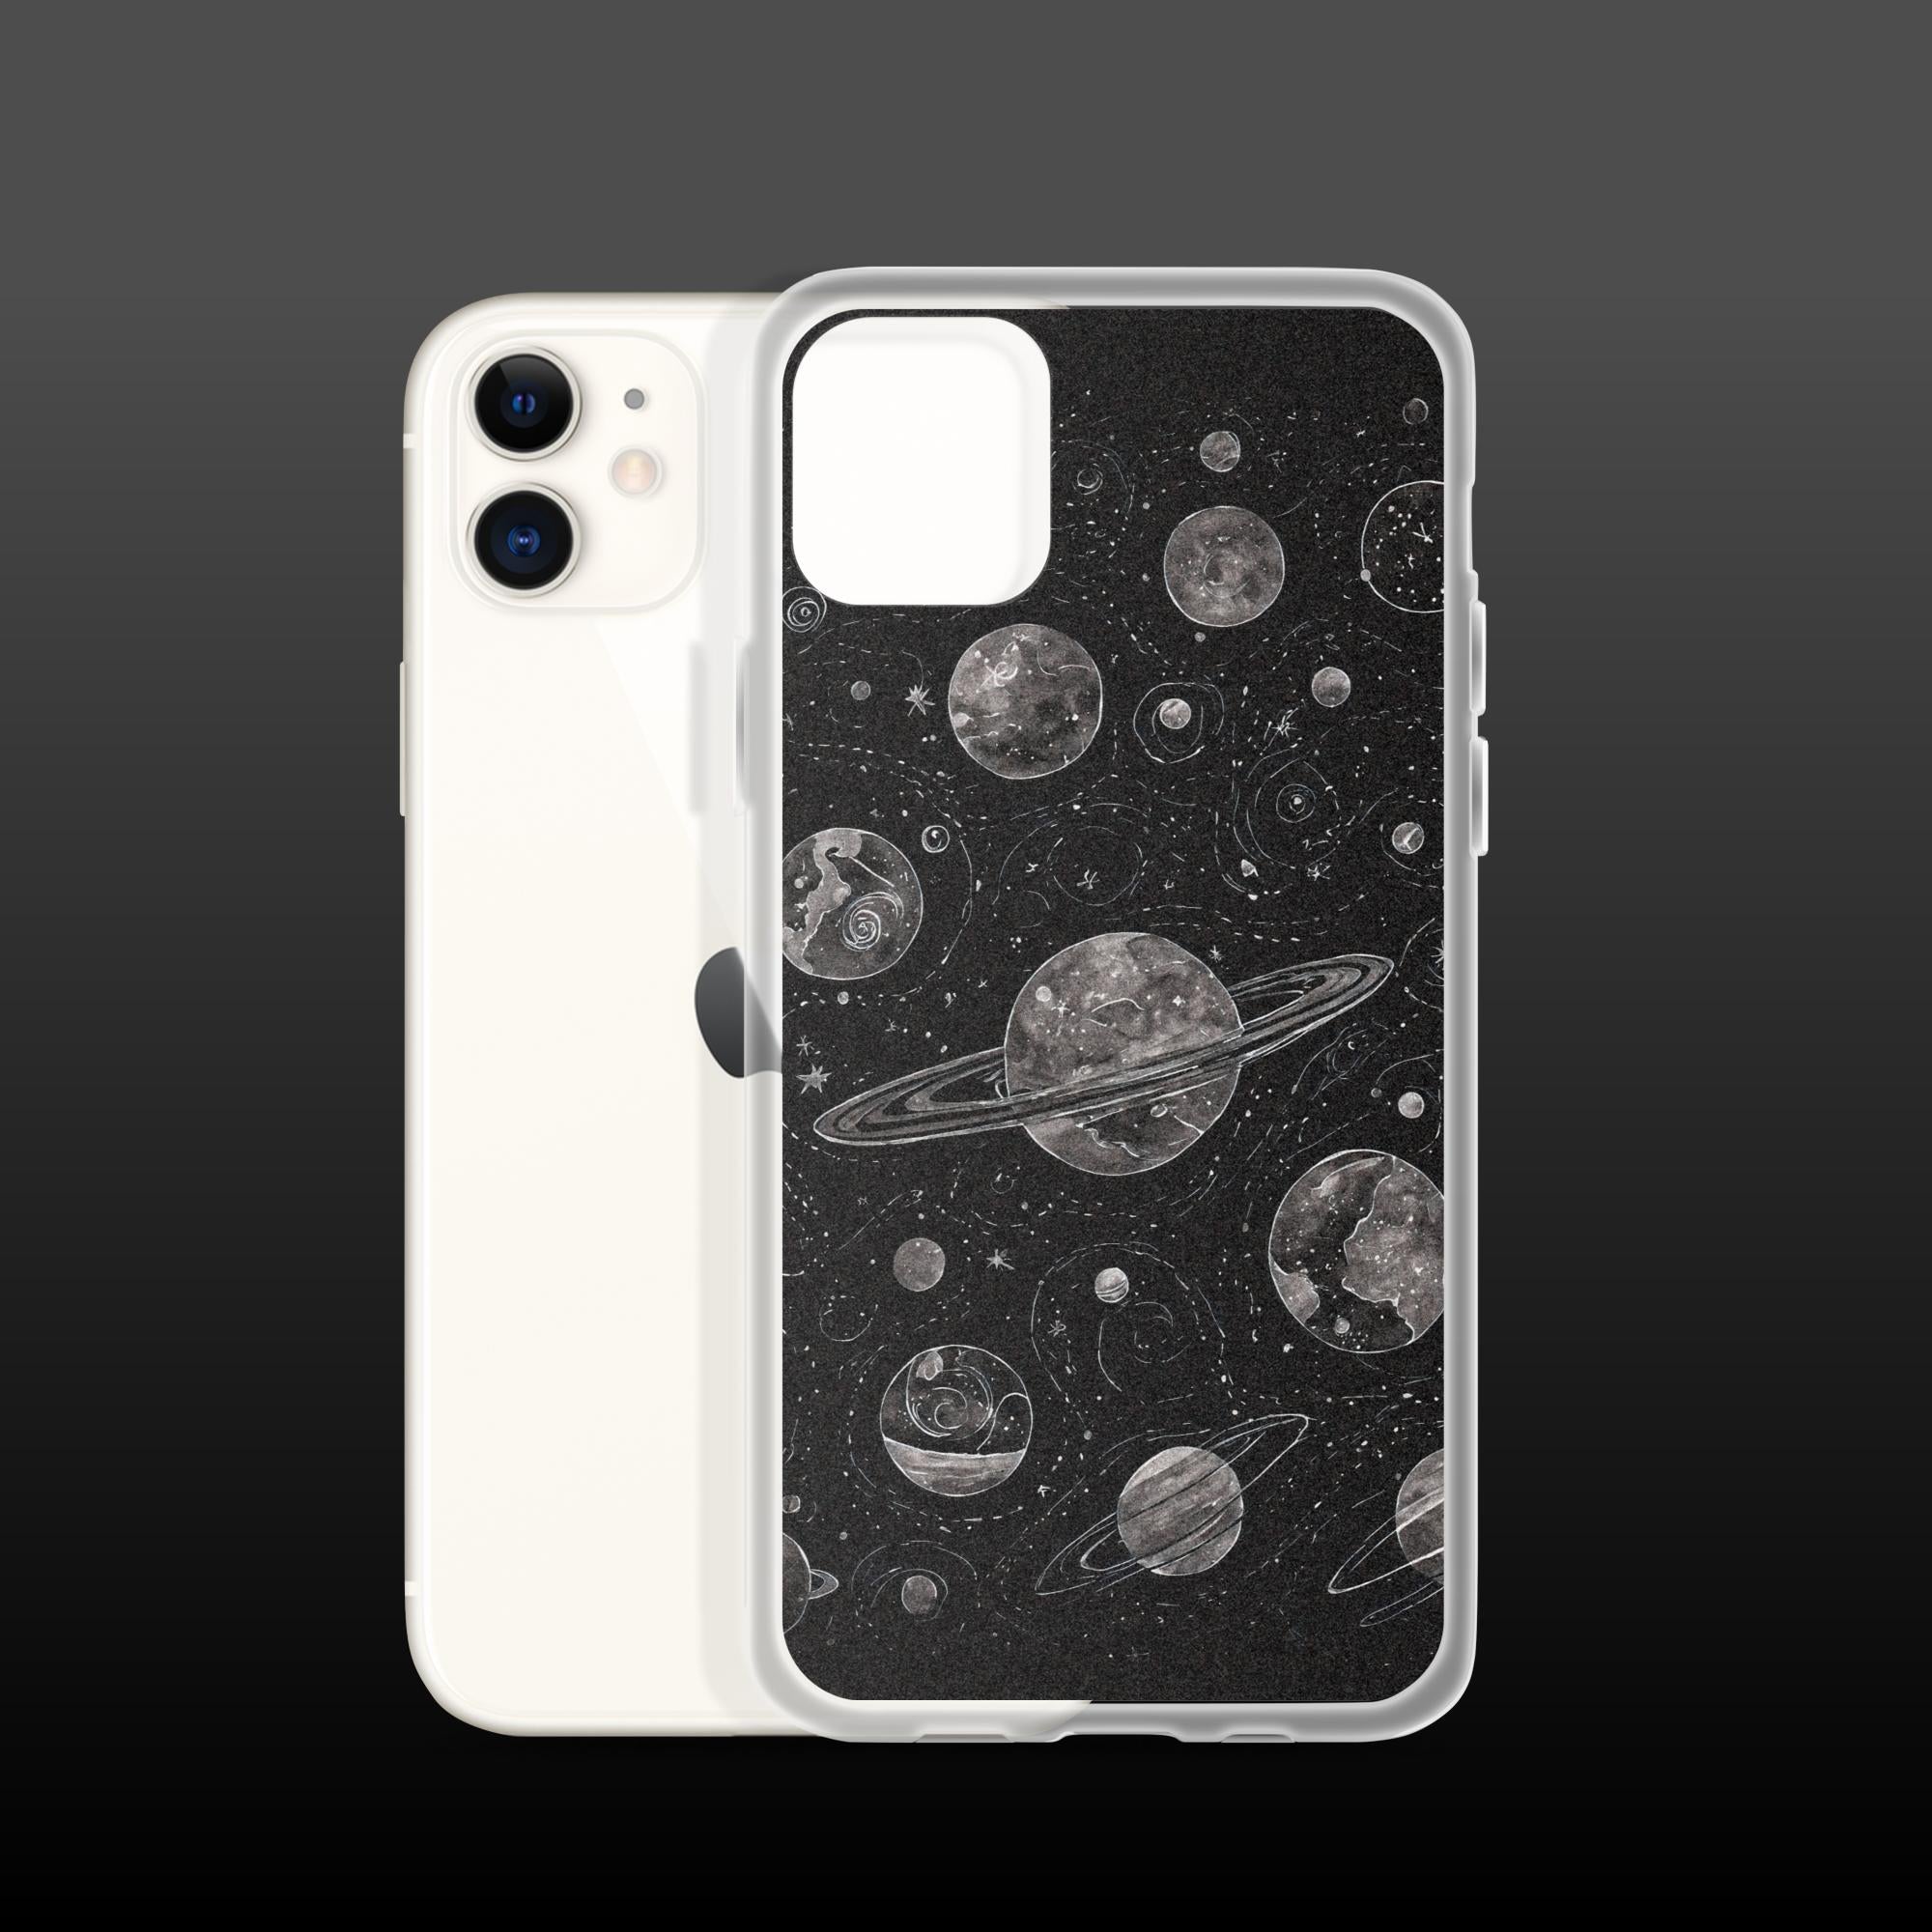 "Map of the universe" clear iphone case - Clear iphone case - Ever colorful